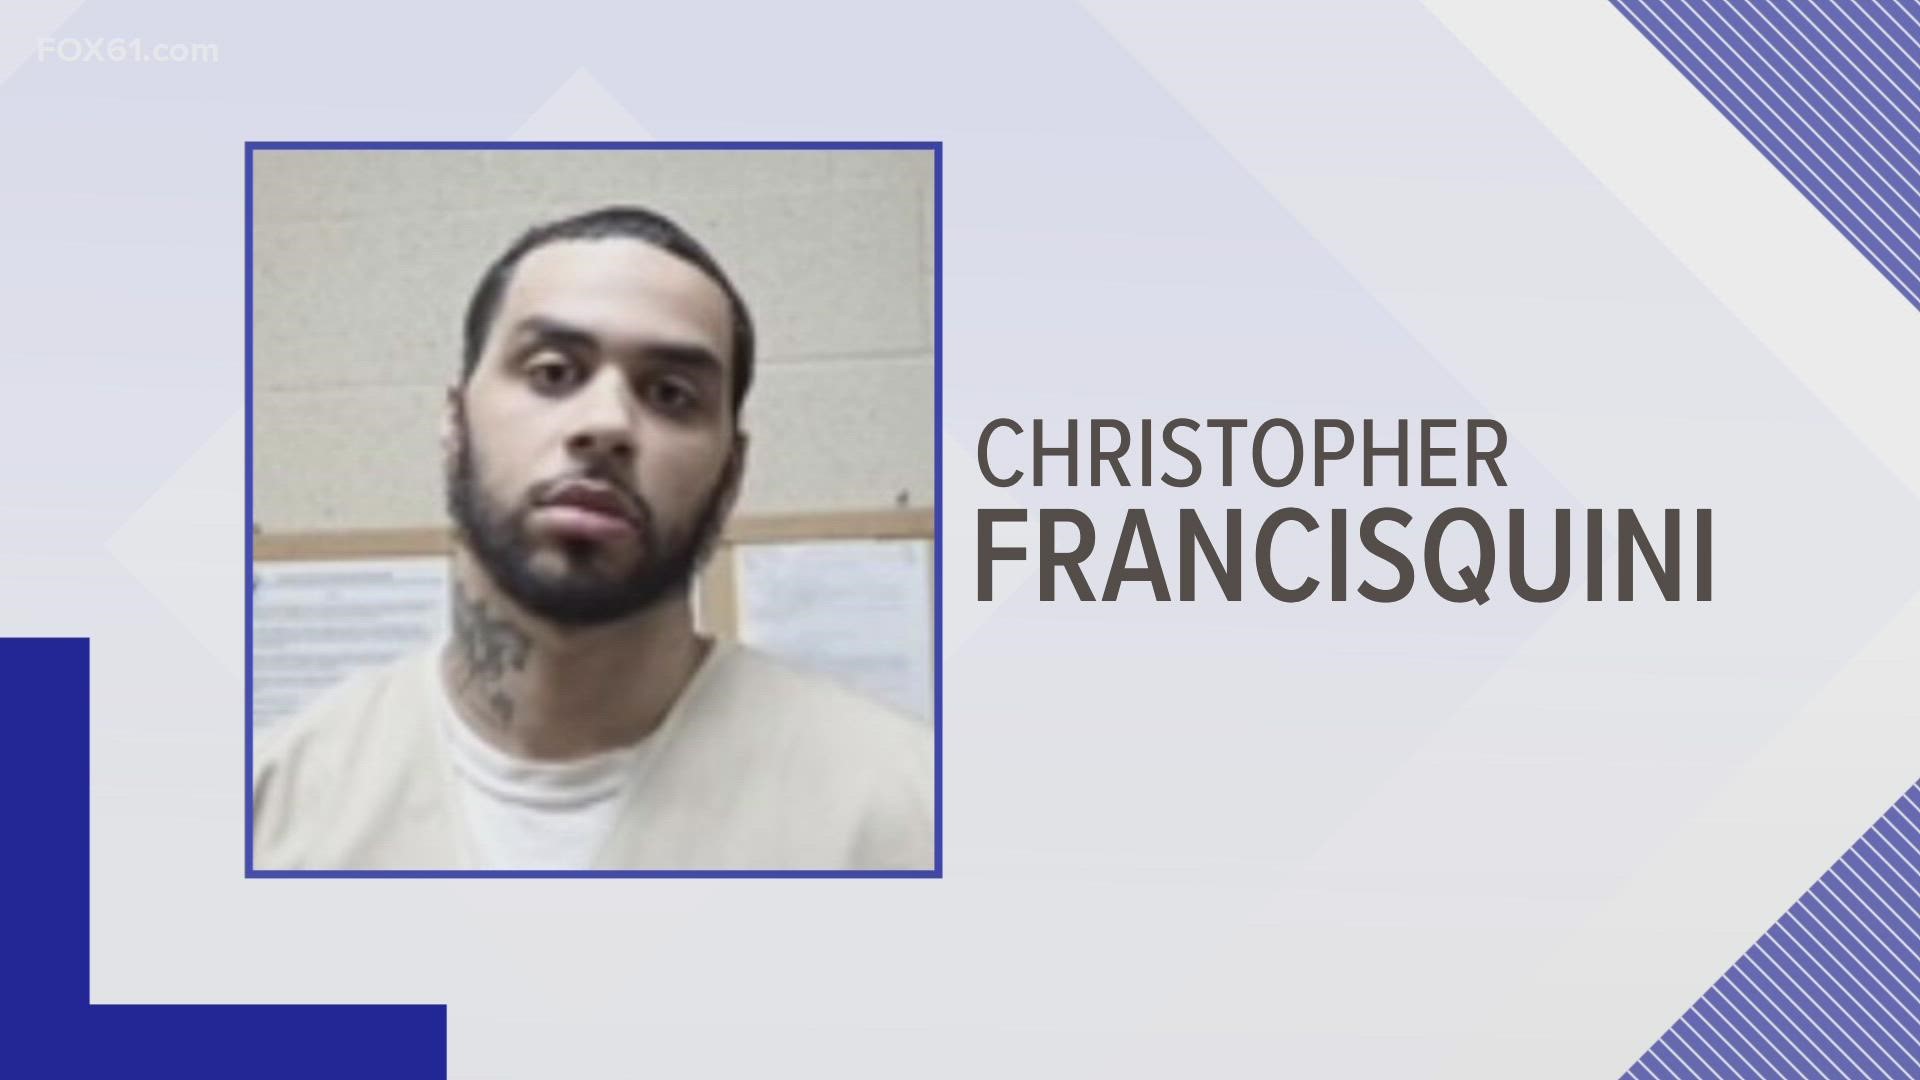 Christopher Francisquini faces charges of murder with special circumstances and risk of injury to a minor.